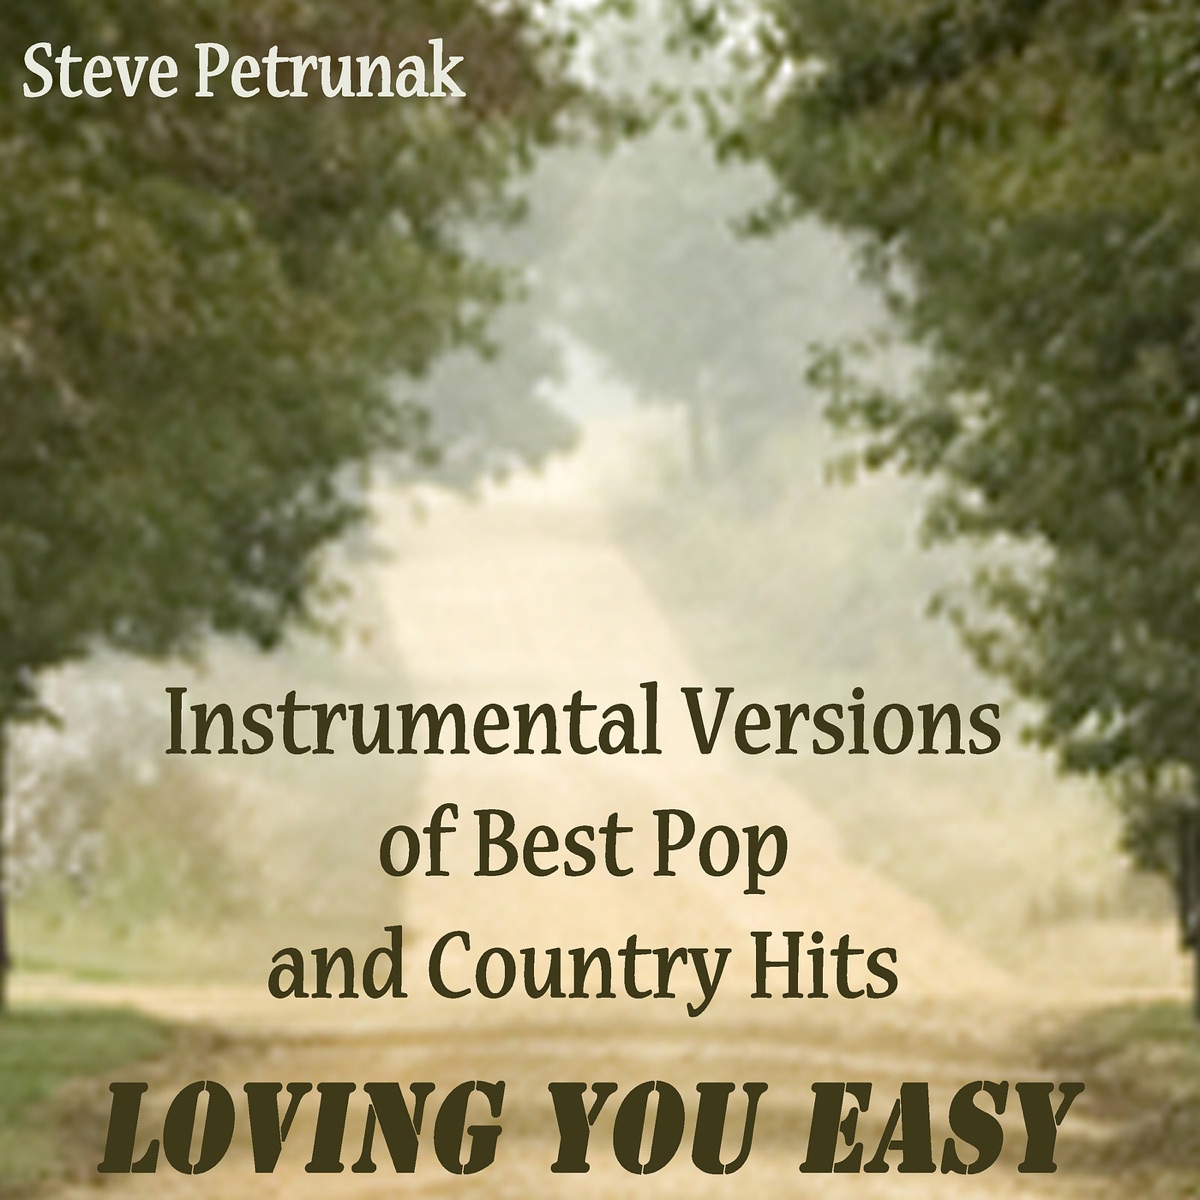 Instrumental Versions of Best Pop and Country Hits - Loving You Easy -  Album by Steve Petrunak - Apple Music